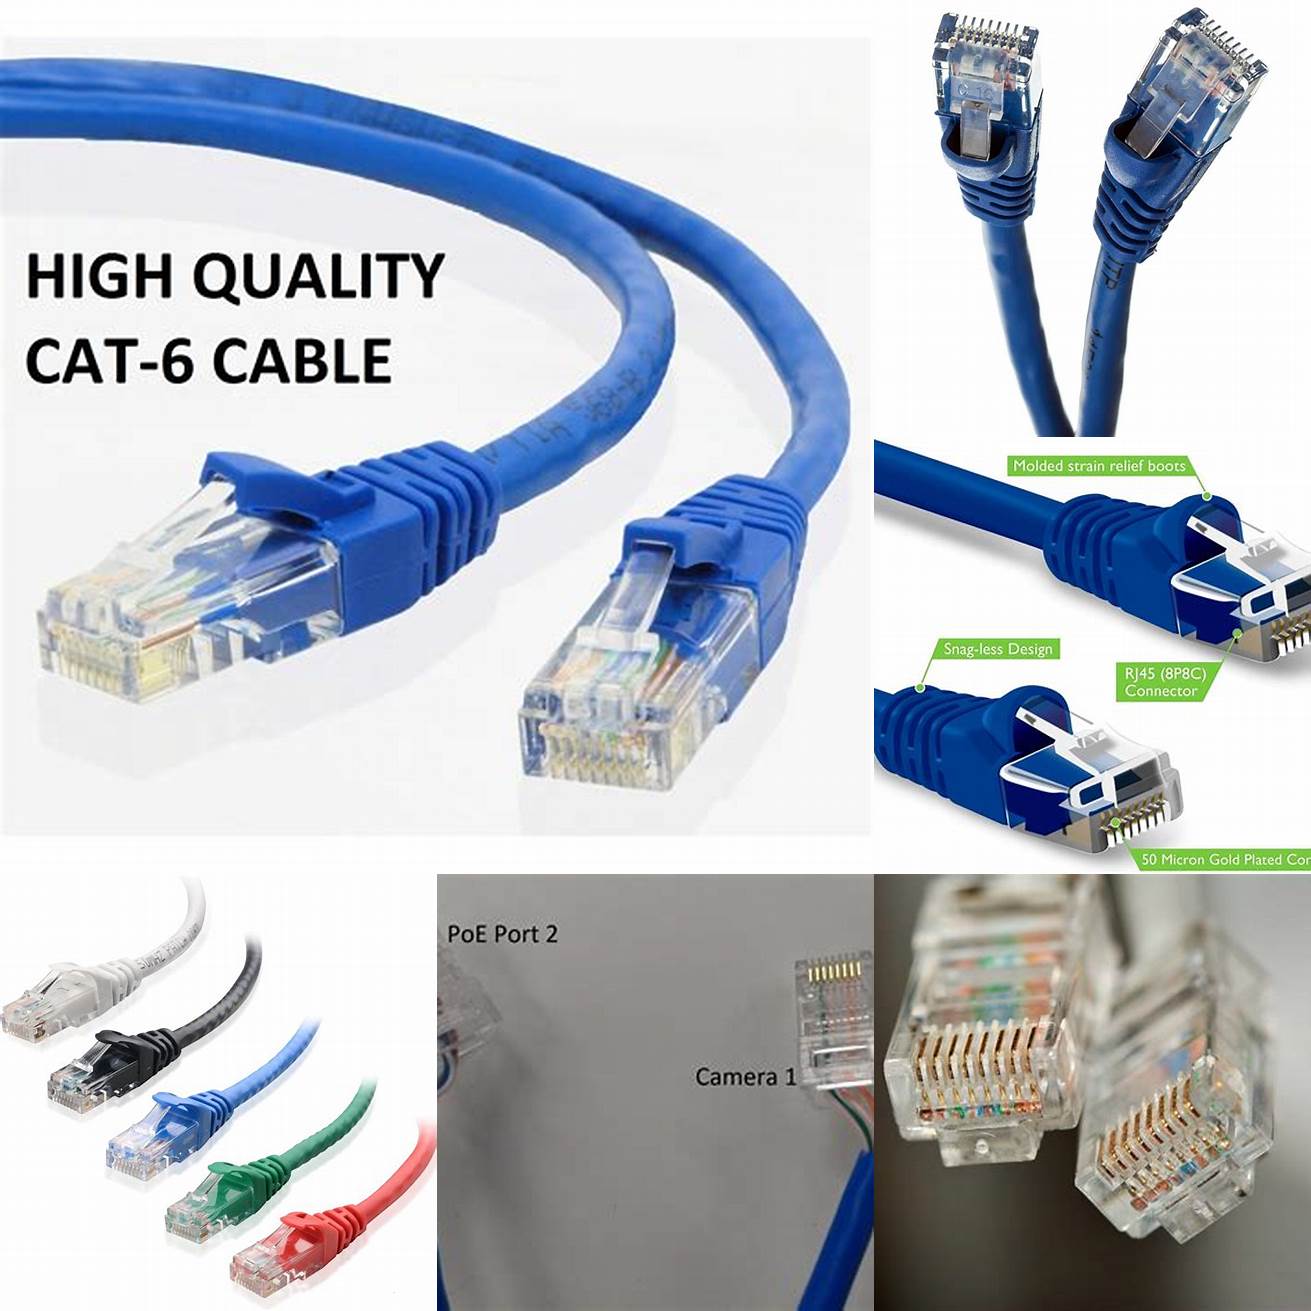 2 Cat 6 cables can transmit data at speeds up to 10Gbps